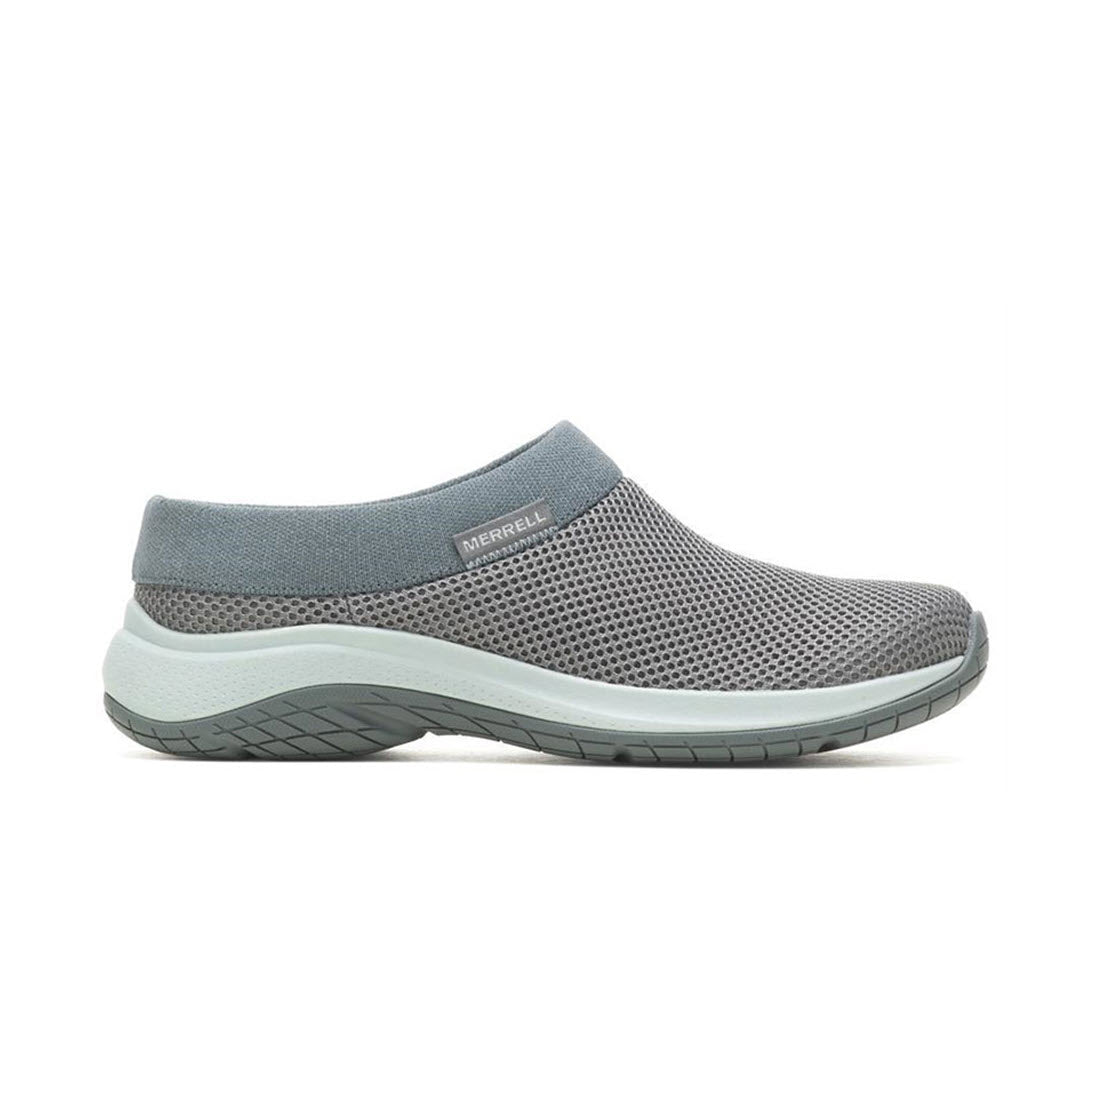 Gray Merrell Encore Breeze 5 slip-on mesh sneaker isolated on a white background. 

Replacing with the given product name and brand name:
Gray Merrell Encore Breeze 5 Rock - Womens slip-on mesh sneaker isolated on a white background.